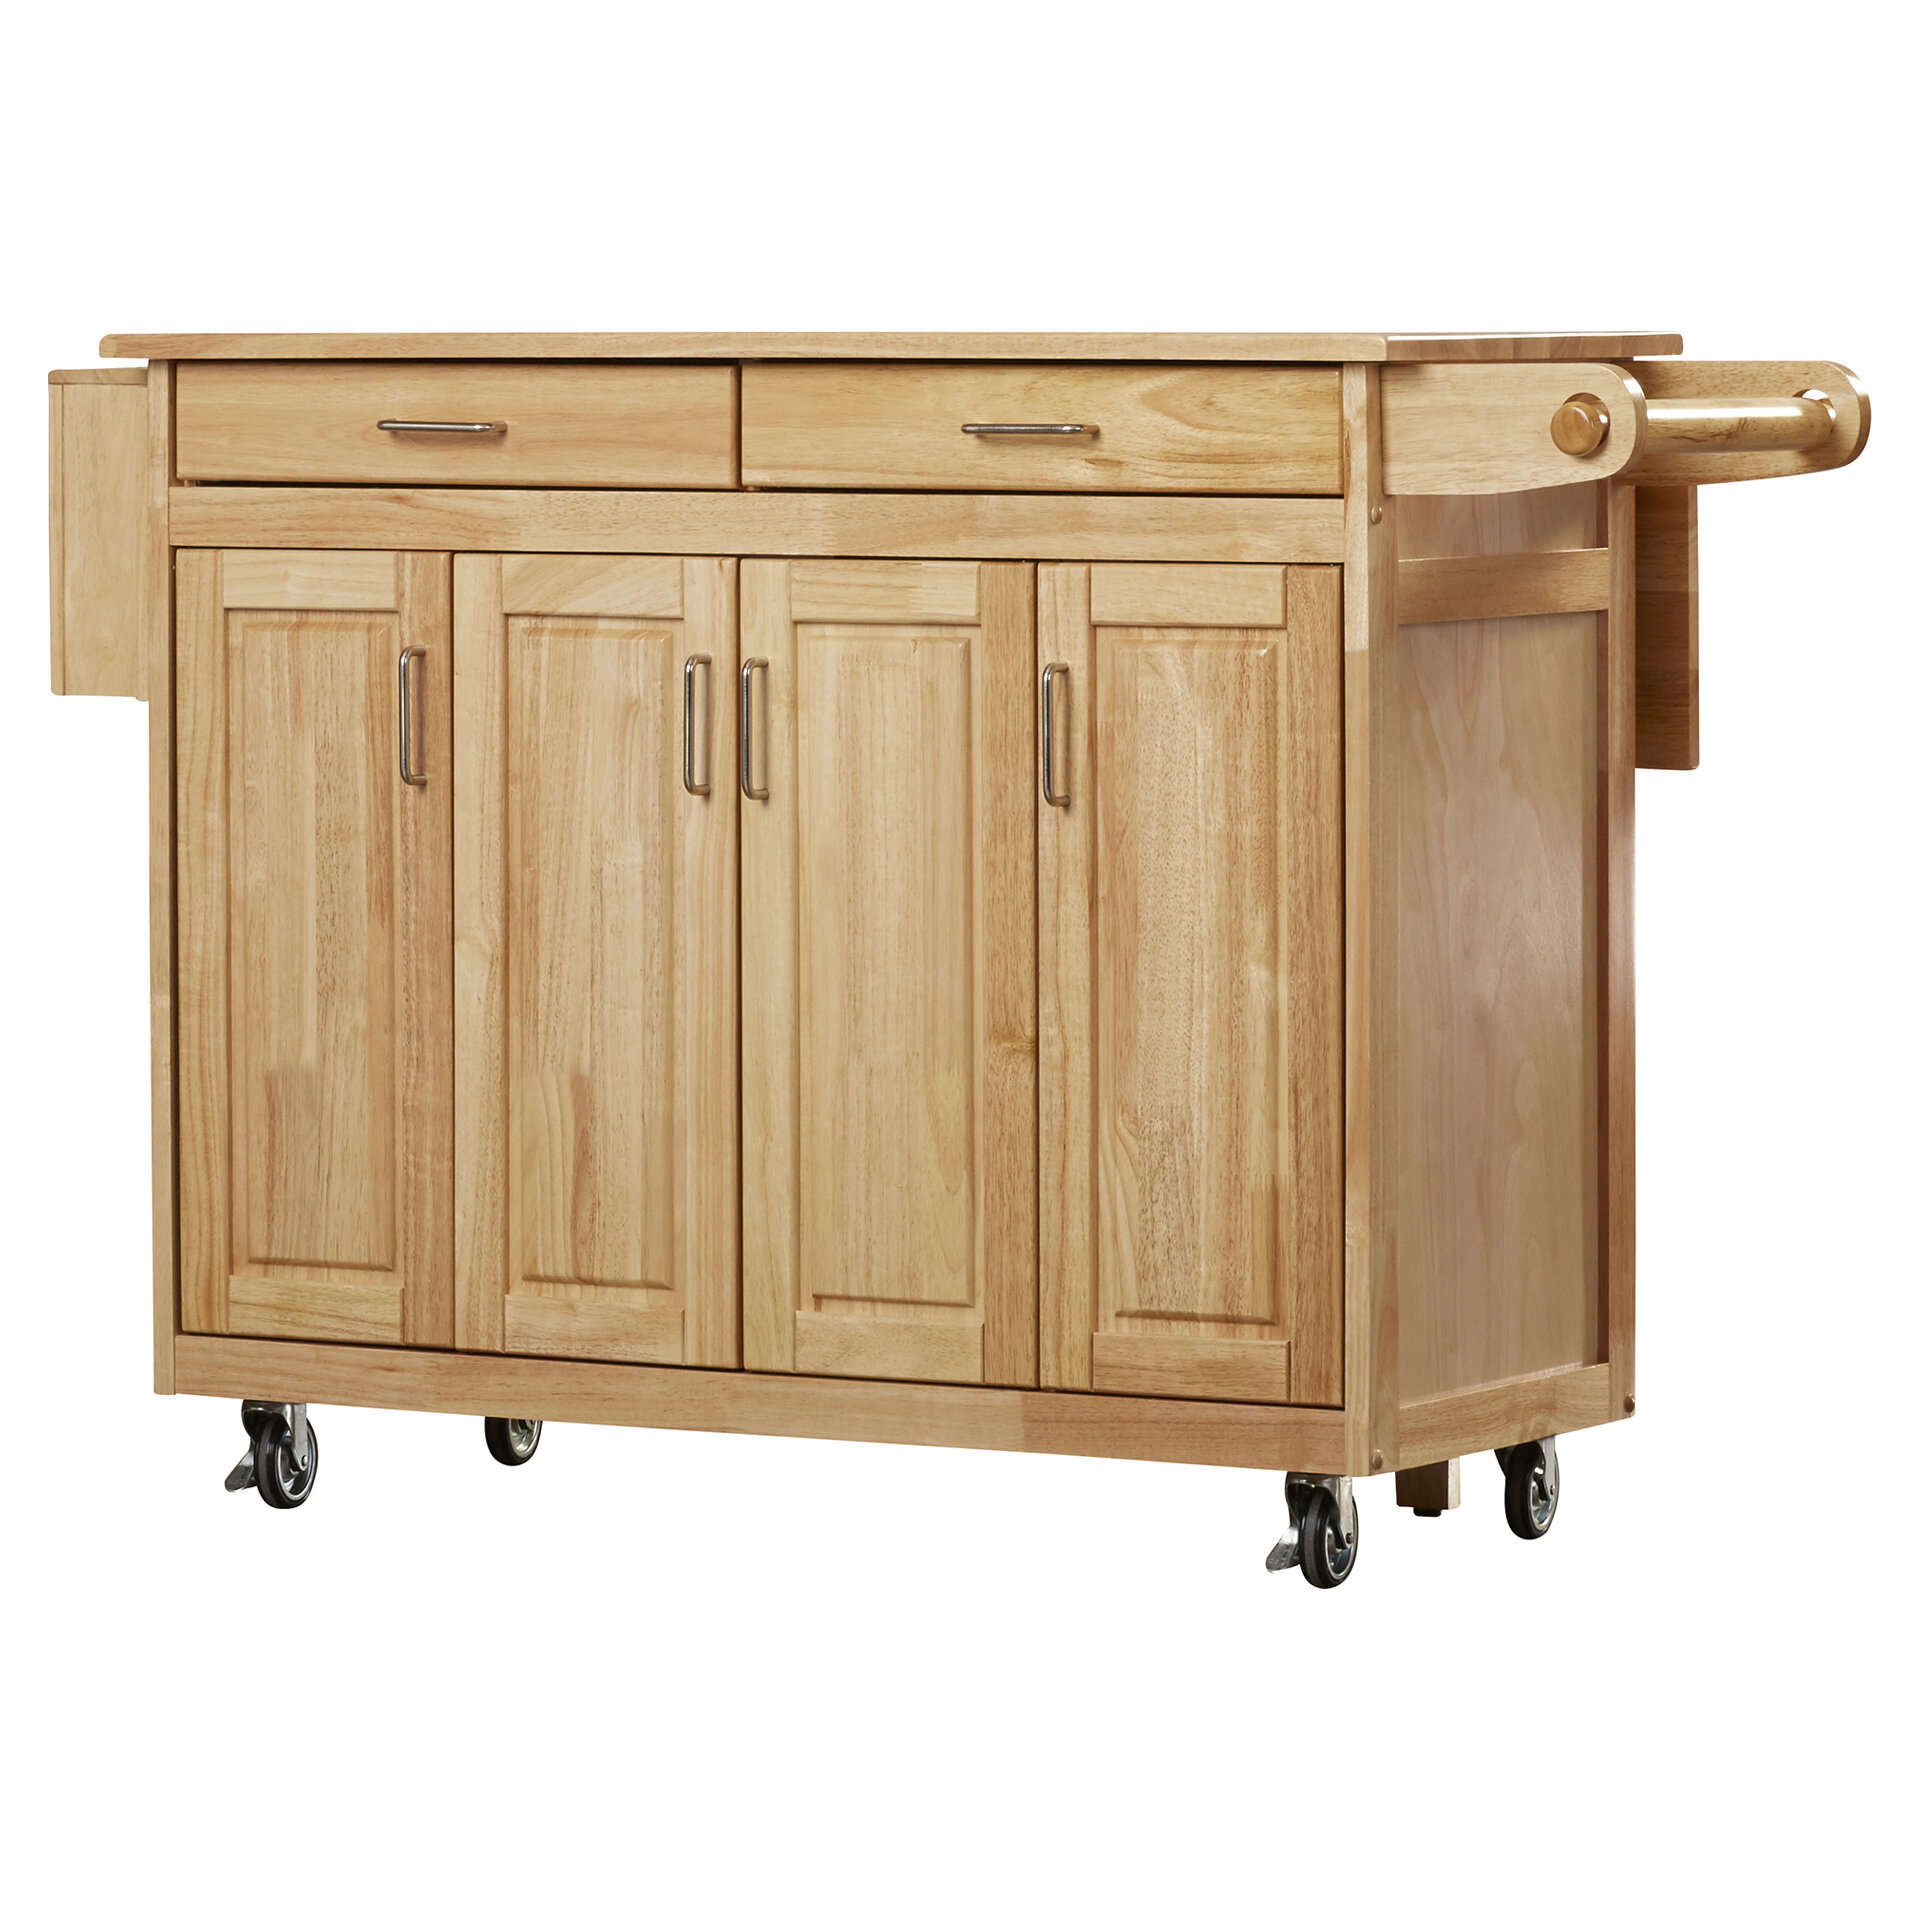 Epping Kitchen Cart With Wood Top Reviews Birch Lane